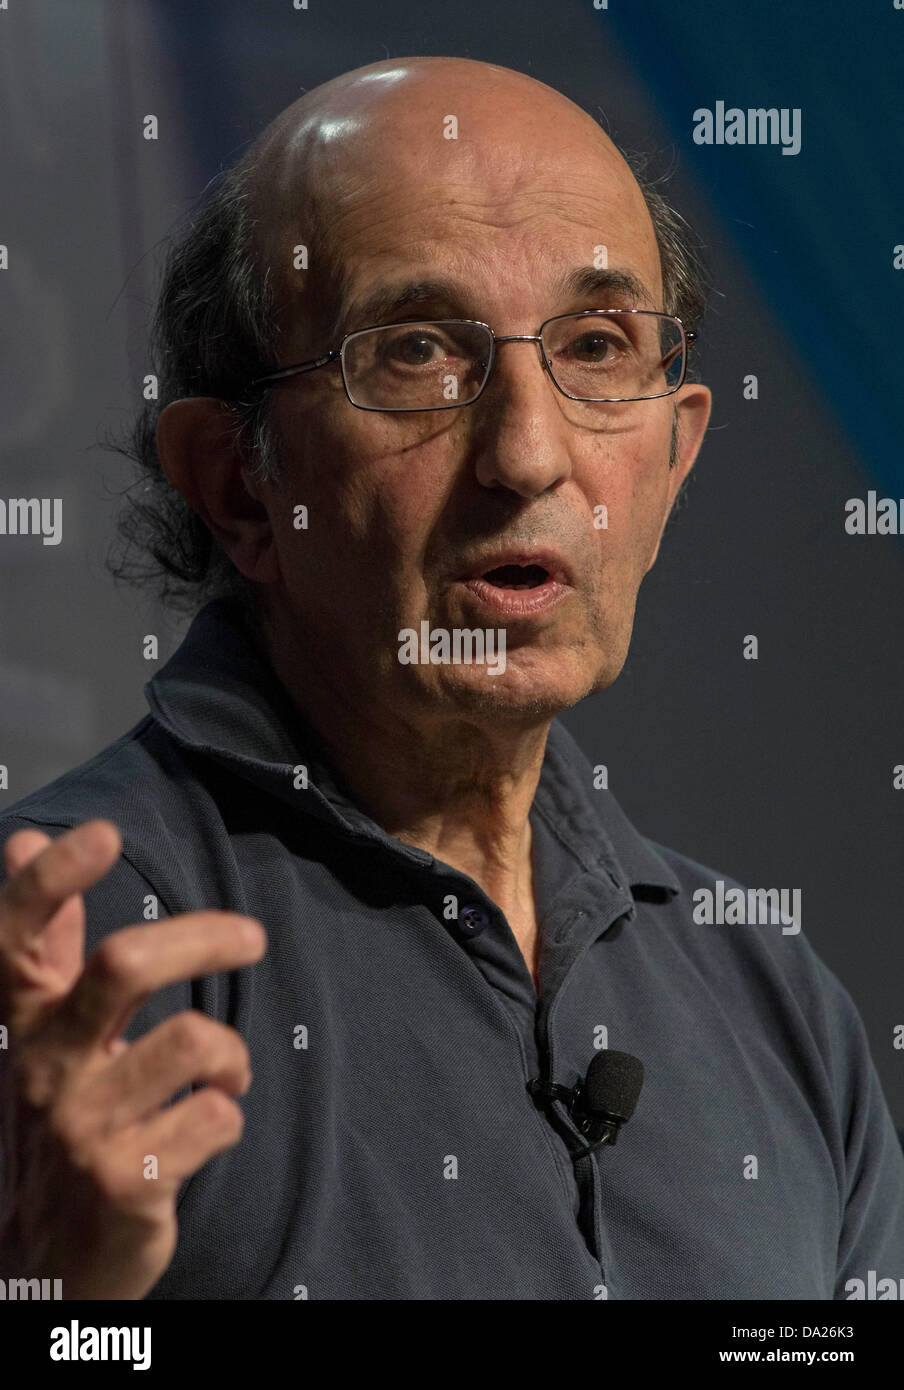 June 30, 2013 - Aspen, Colorado, U.S. - JOEL KLEIN, CEO of Amplify, takes part in a discussion on education during the Aspen Ideas Festival.(Credit Image: © Brian Cahn/ZUMAPRESS.com) Stock Photo